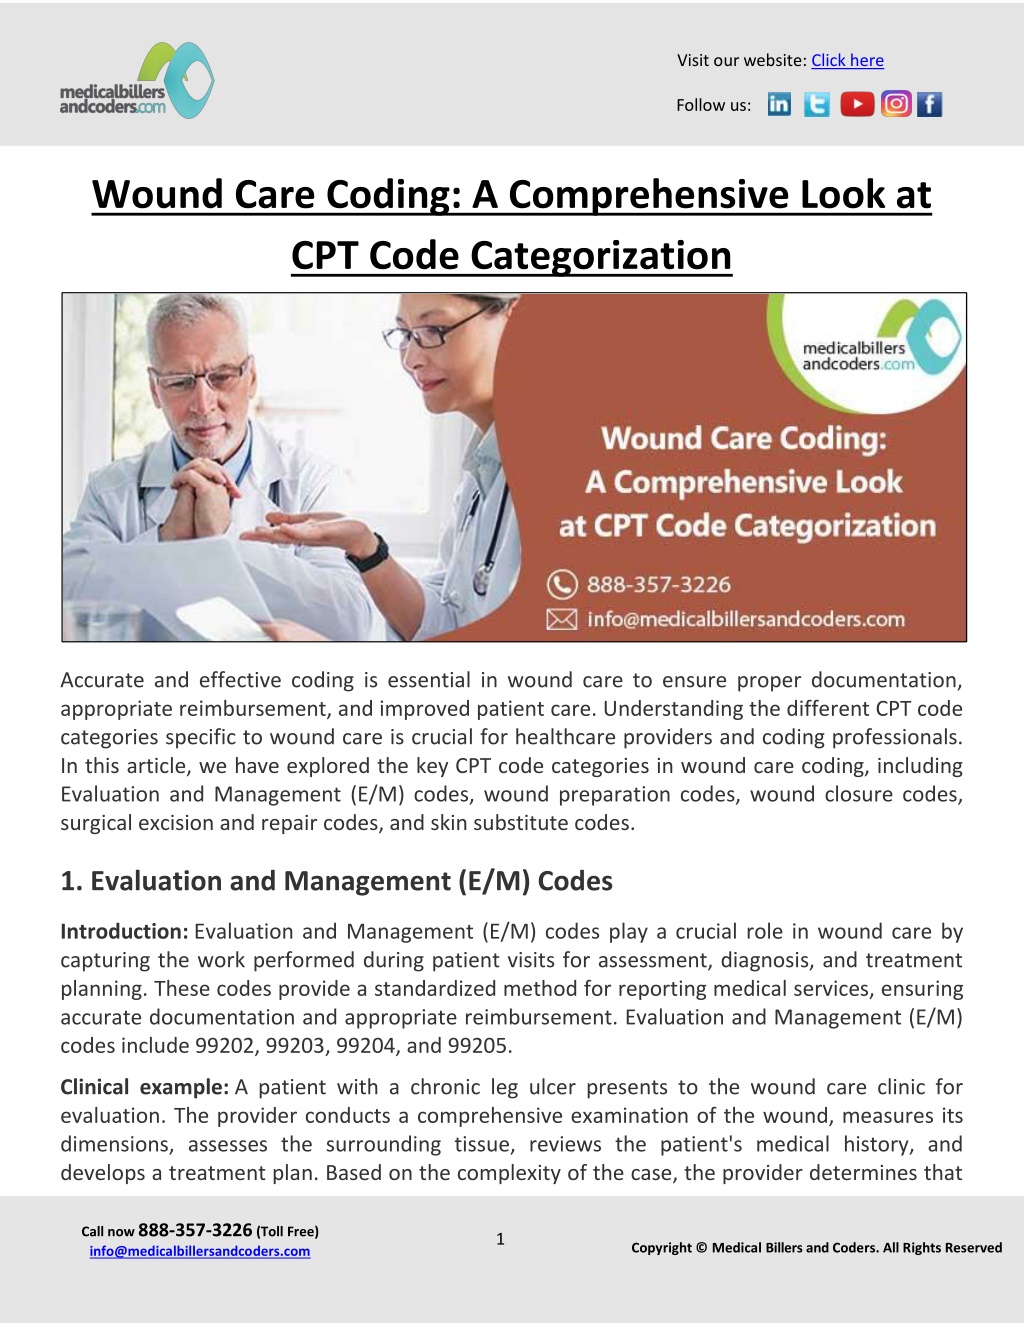 PPT Wound Care Coding A Comprehensive Look at CPT Code